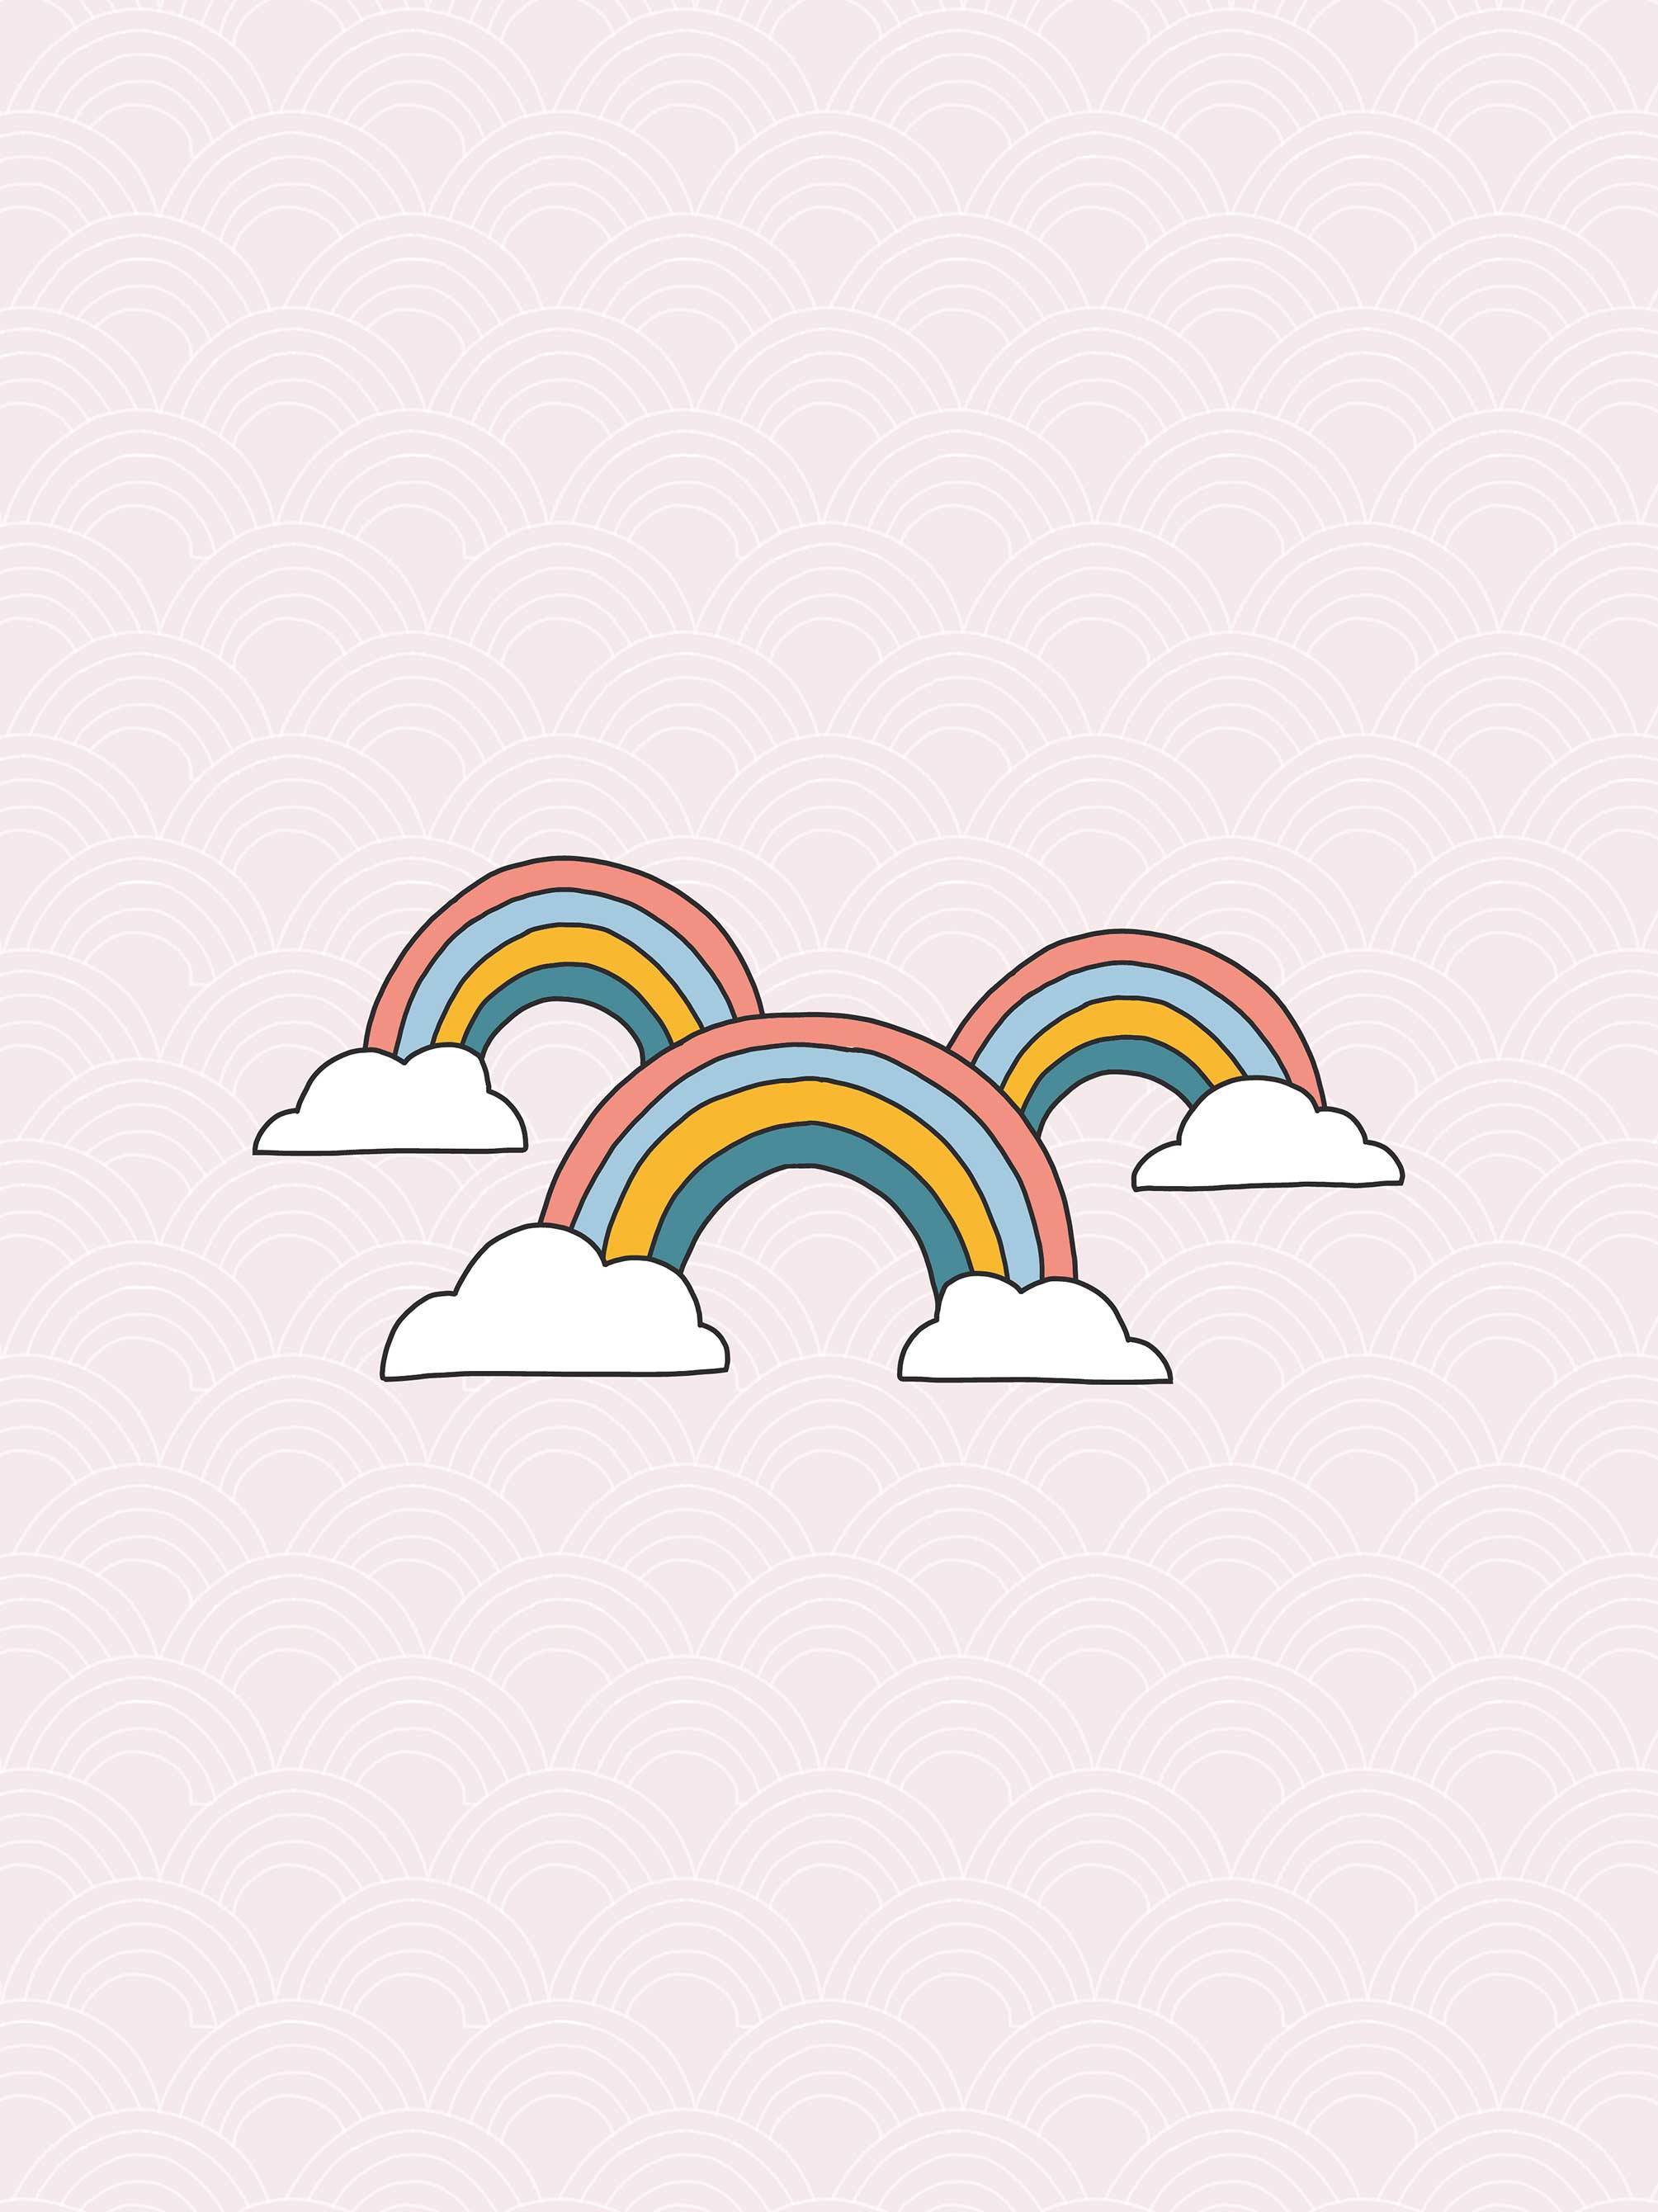 Rainbow For Phone Wallpapers